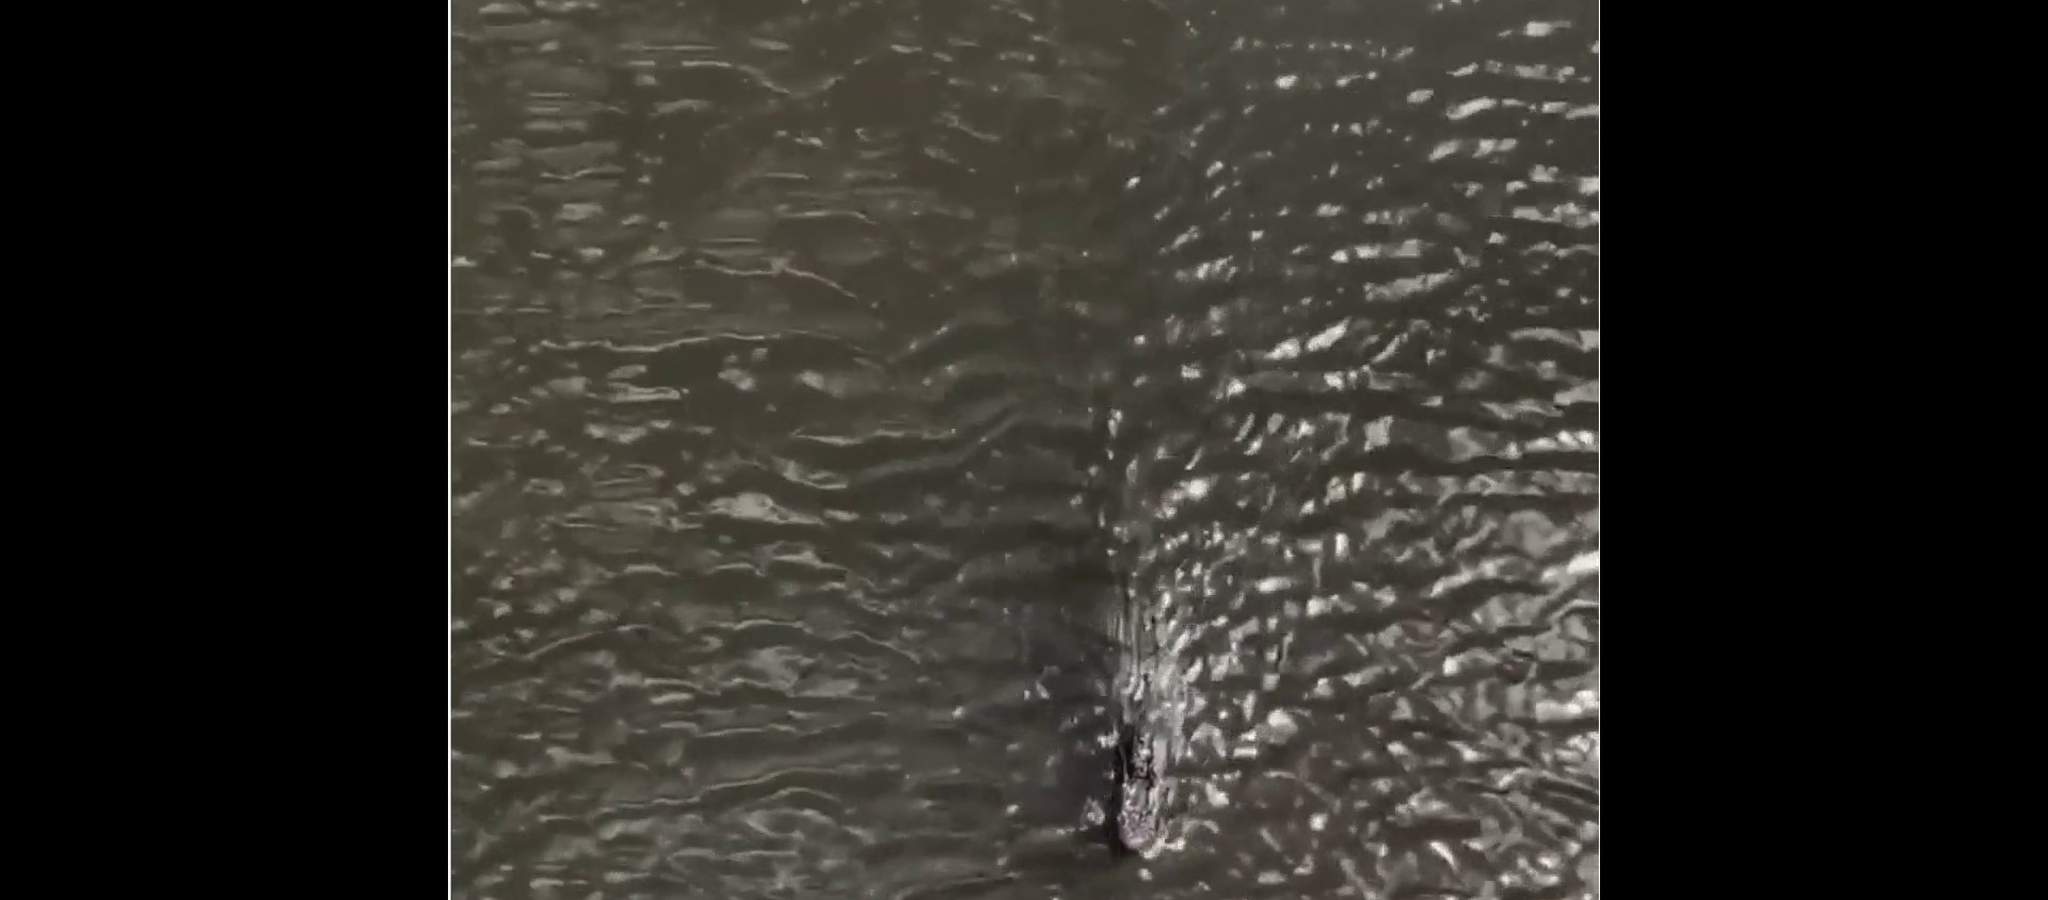 VIDEO: Gator spotted swimming with shark in Indian River Lagoon